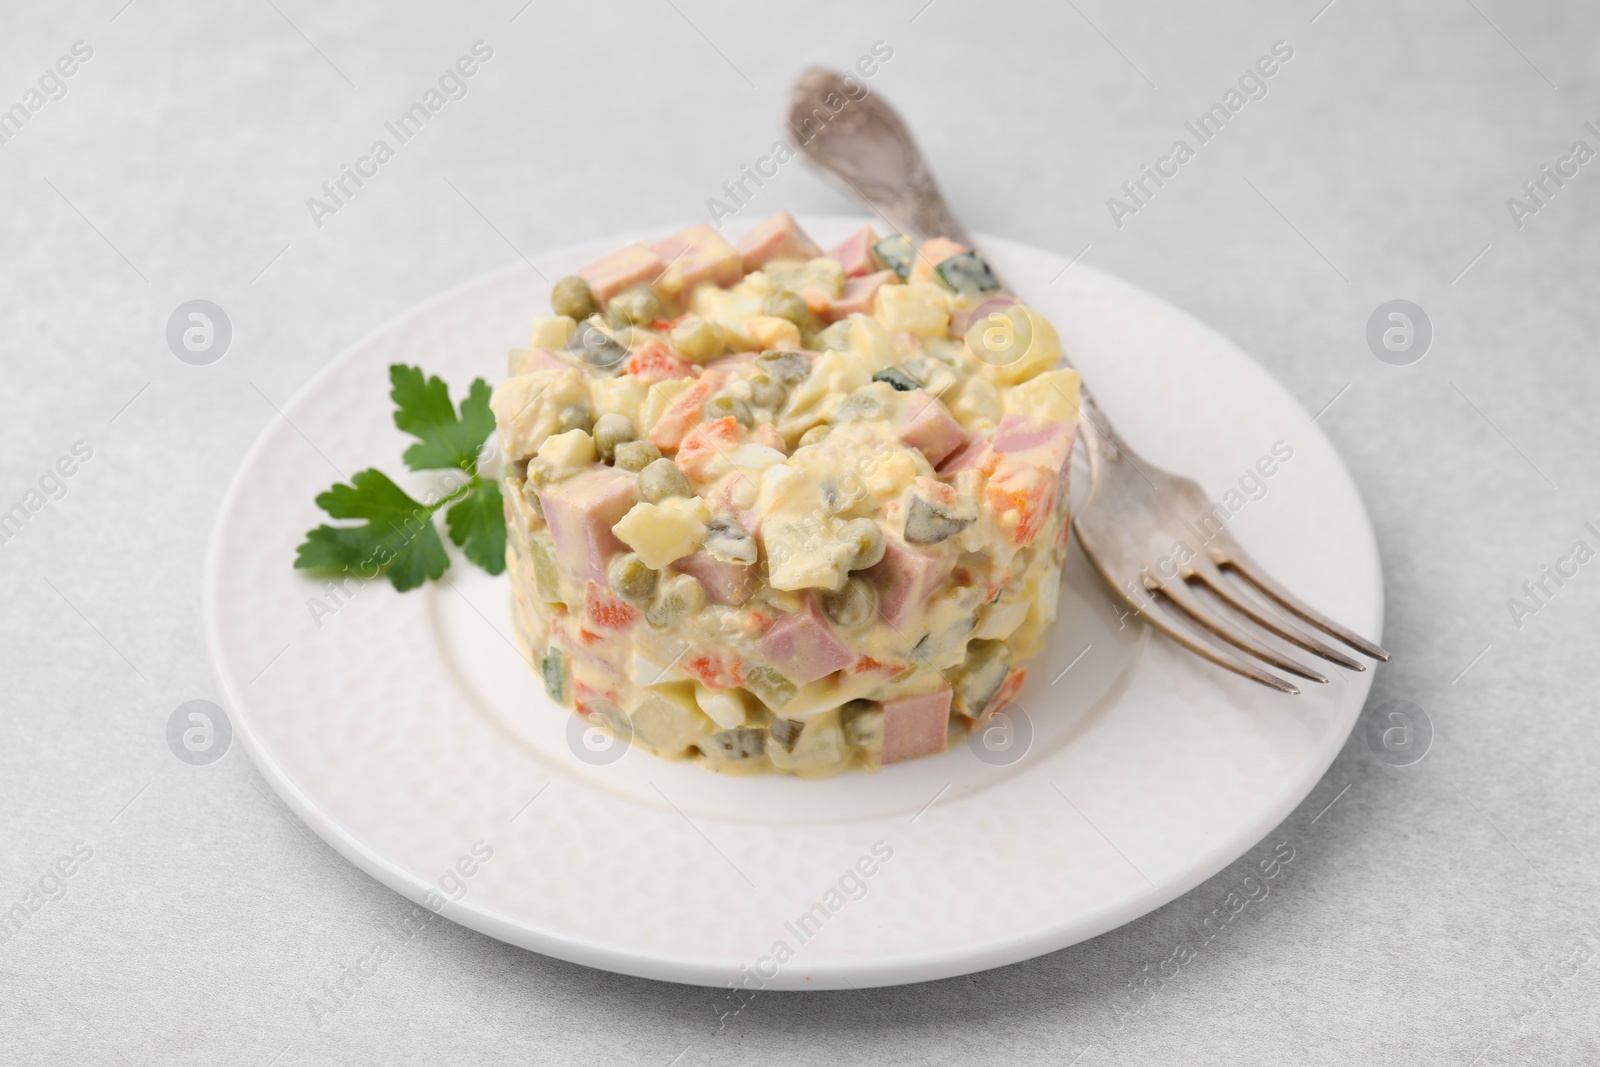 Photo of Tasty Olivier salad with boiled sausage and fork on light table